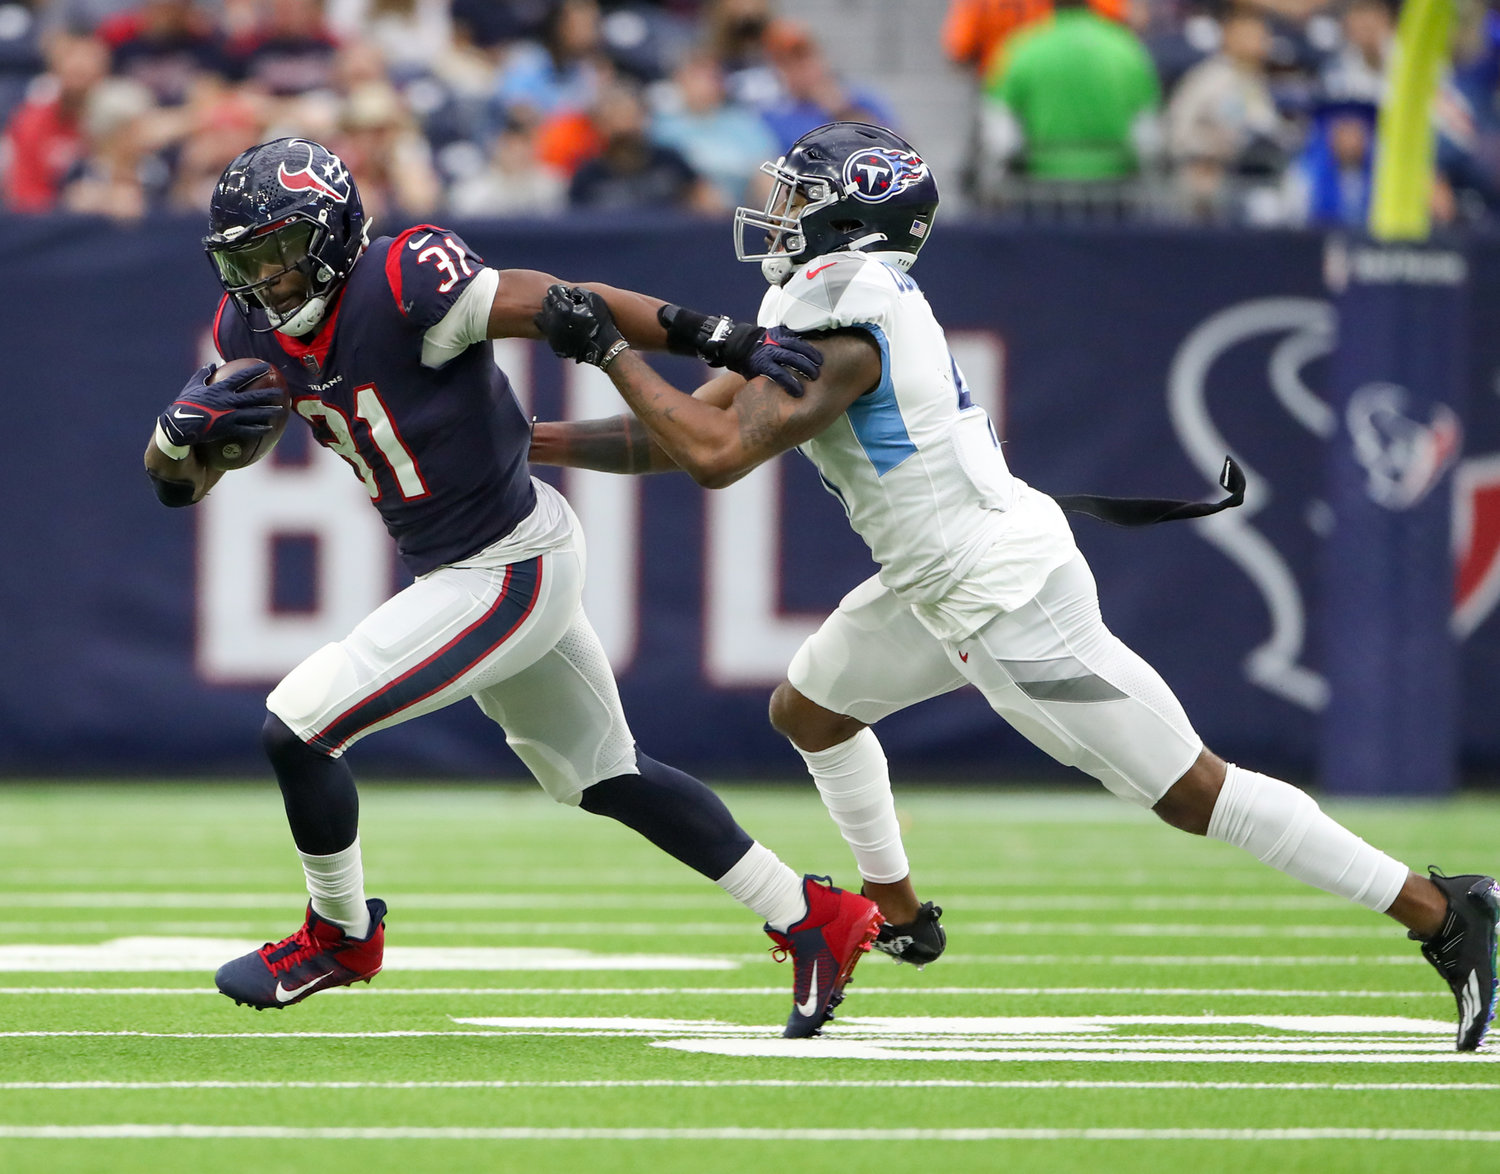 Houston Texans running back David Johnson (31) works to elude Tennessee Titans outside linebacker Zach Cunningham (41) during an NFL game on Jan. 9, 2022 in Houston, Texas. The Titans won, 28-25.